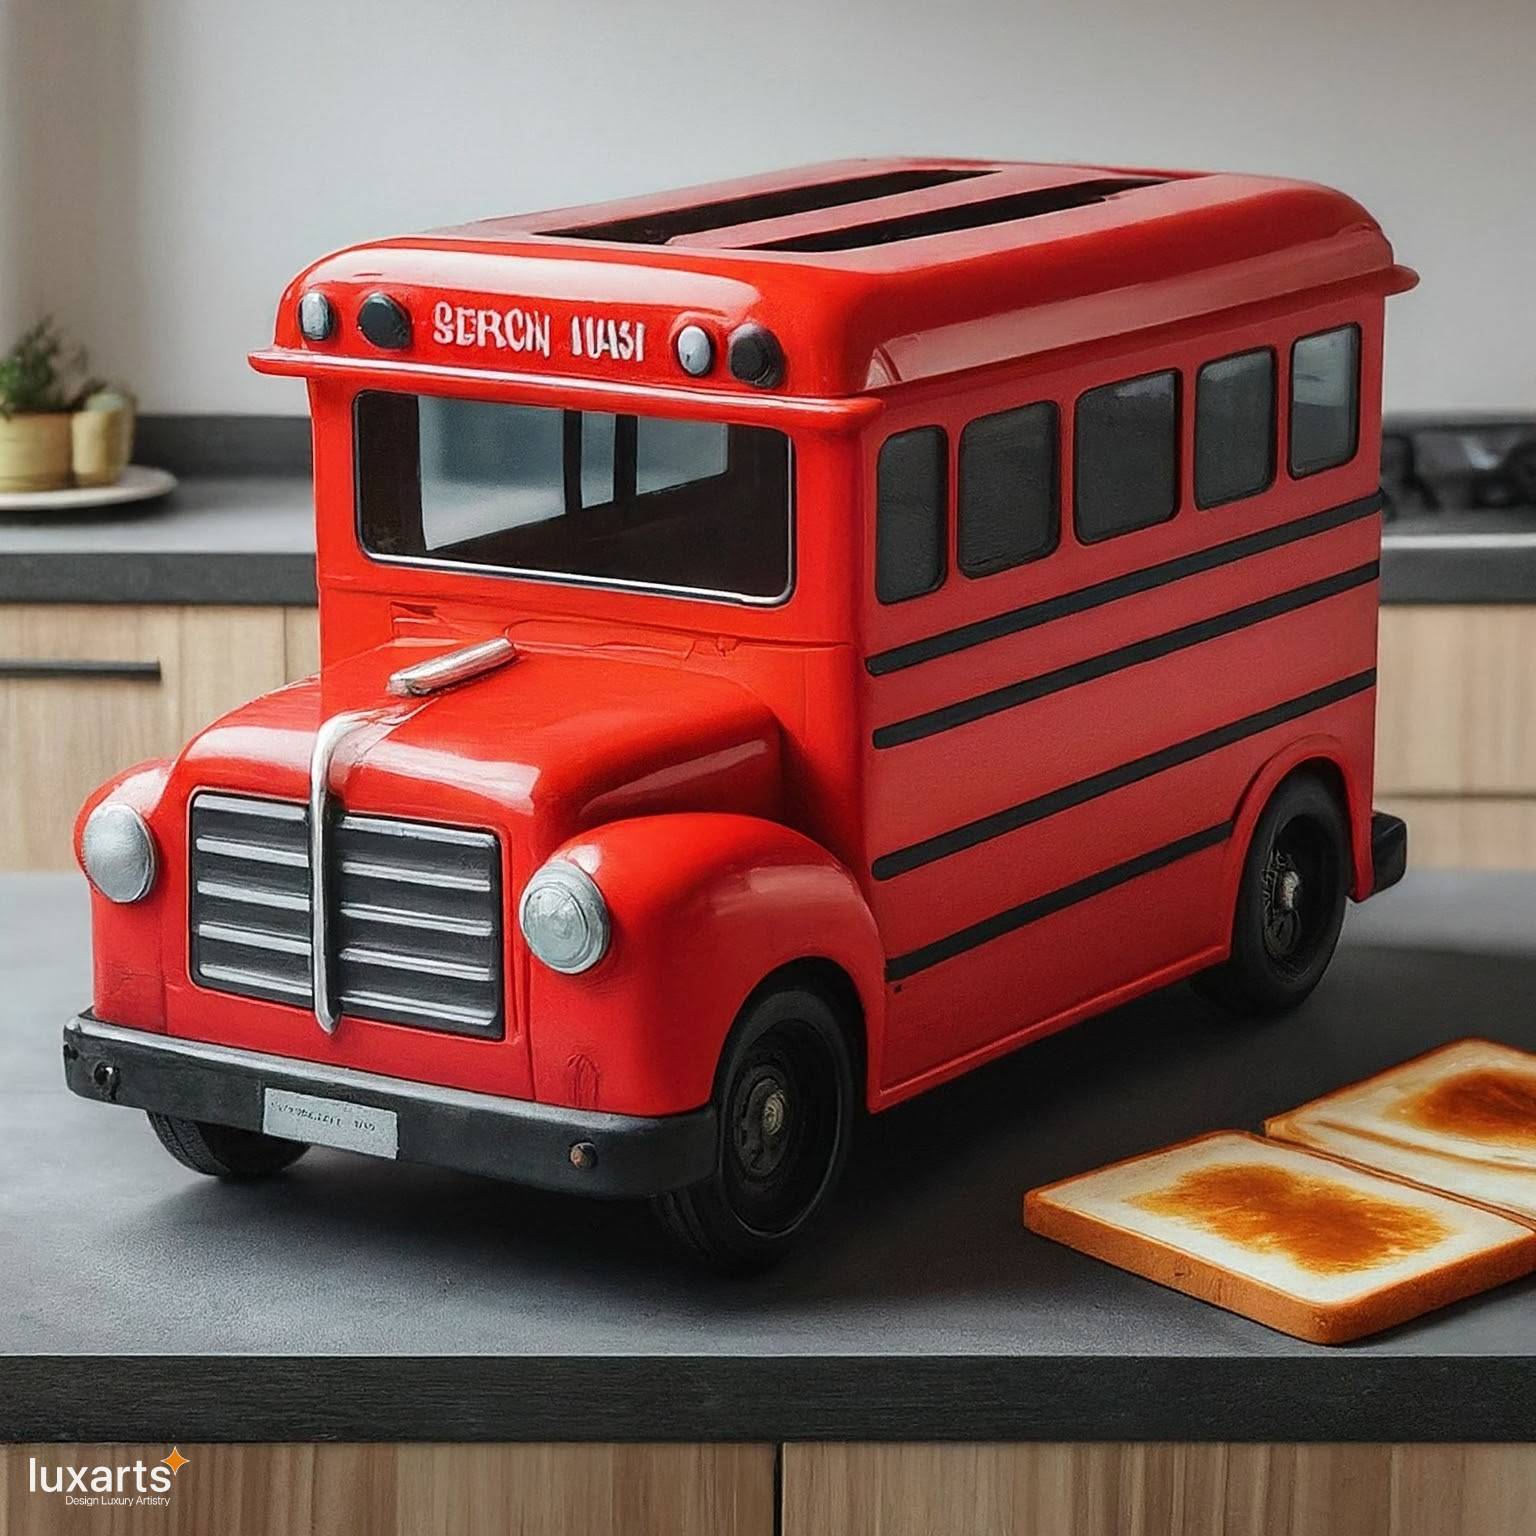 School Bus Shaped Toaster: Adding Fun to Breakfast Time luxarts school bus toaster 5